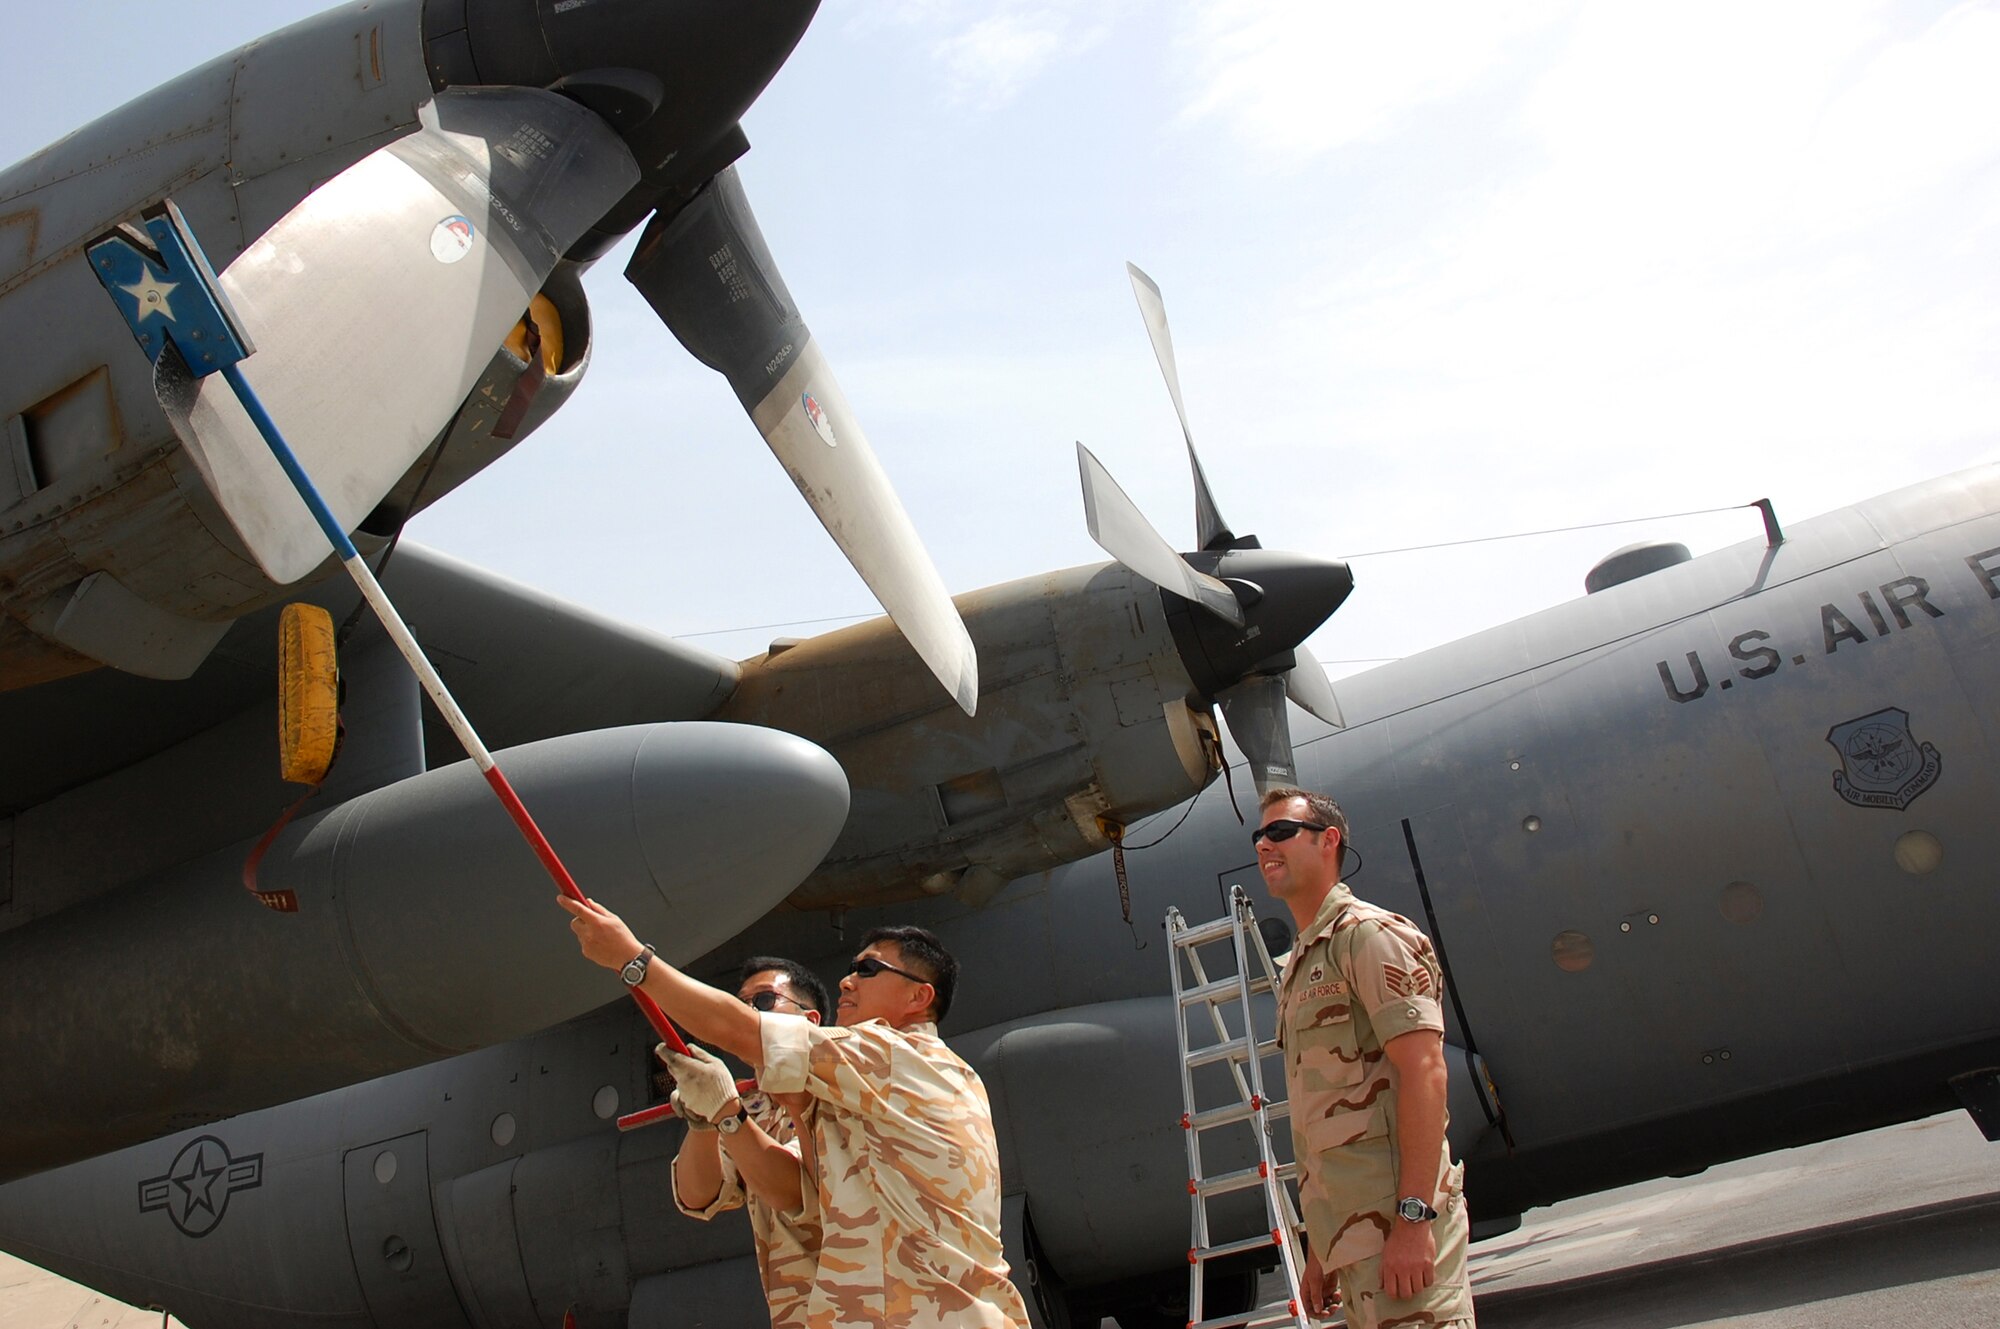 SOUTHWEST ASIA -- Warrant Officer Hae Ok Yoon (left) and Master Sgt. Jun Wan Park (center) use a prop stick to make sure the No. 1 blade is positioned in the T-position to prevent leaks on a U.S. Air Force C-130 Hercules while Staff Sgt. William Phillips watches March 26, 2008, on an air base in the Persian Gulf Region. Warrant Officer Yoon and Sergeant Park are from the Republic of Korea Air Force 58th Airlift Wing, and Sergeant Phillips is a crew chief deployed to the 386th Expeditionary Aircraft Maintenance Squadron. Airmen from the U.S. ROKAF, and Japan Air Self Defense Force Iraq Reconstruction Support Airlift Wing participated in a coalition maintenance exchange program allowing maintainers to sharpen their skills, exchange ideas, and promote closer relations among coalition air forces supporting the Global War on Terrorism. (U.S. Air Force photo/ Staff Sgt. Patrick Dixon)